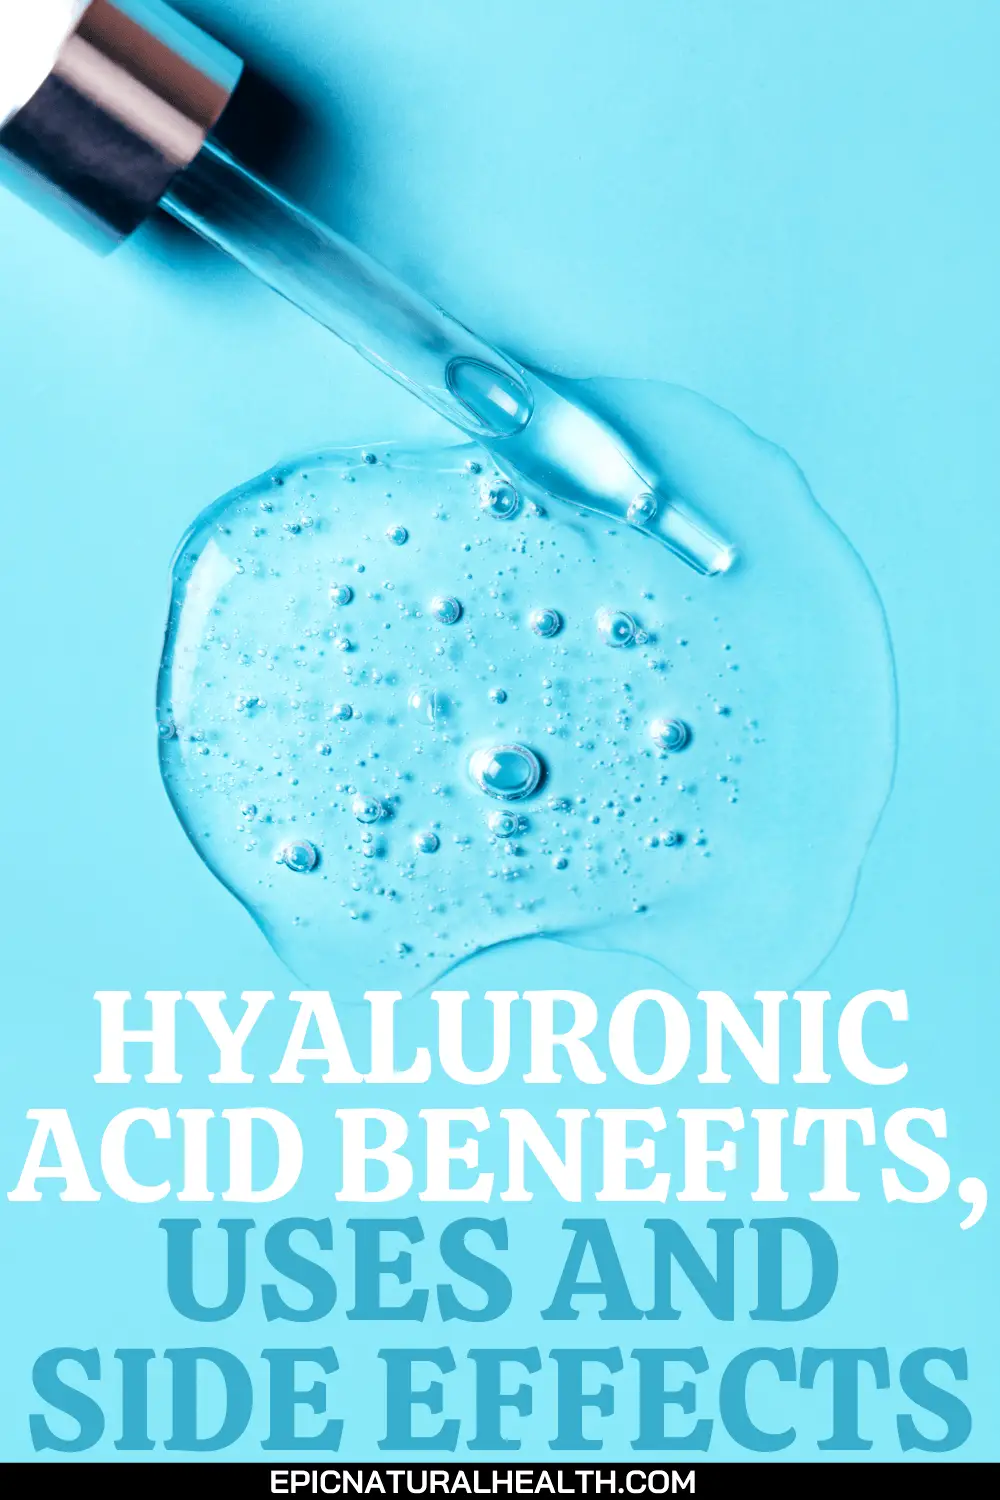 Hyaluronic acid Benefits, Uses and Side effects